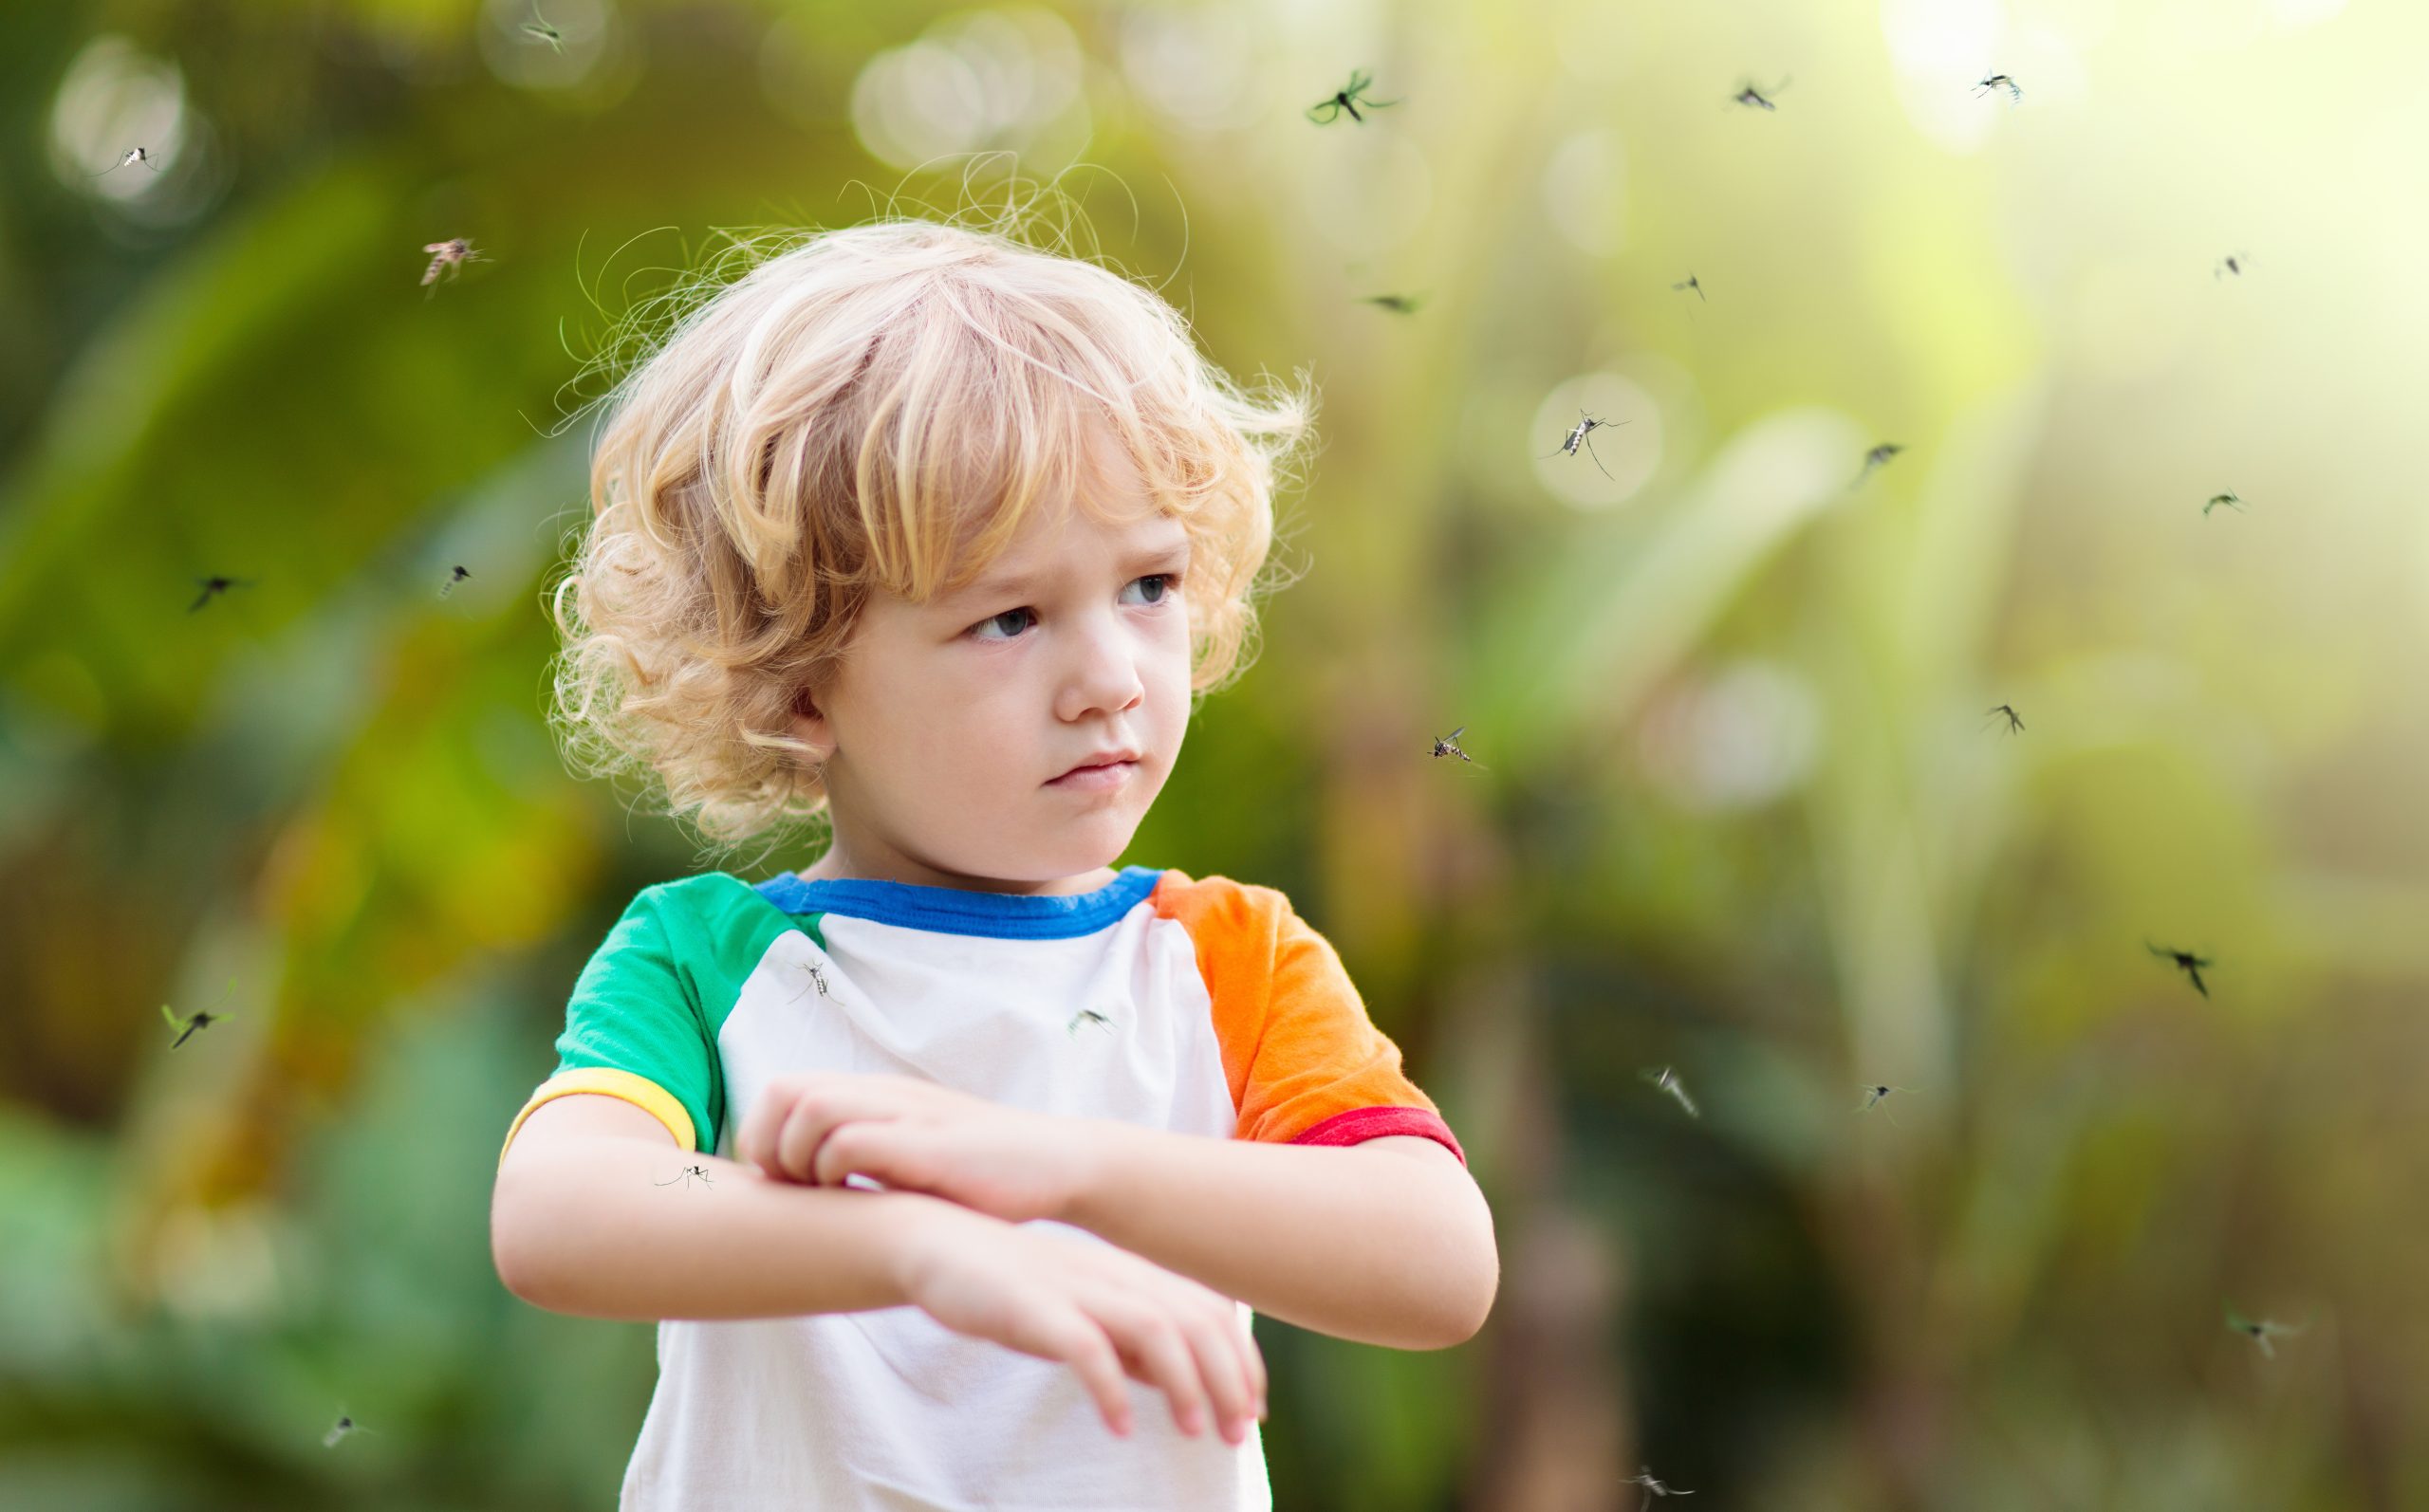 little boy with curly blond hair wearing white t-shirt with multicolored sleeves scratches his arm as a swarm of mosquitoes surround him.